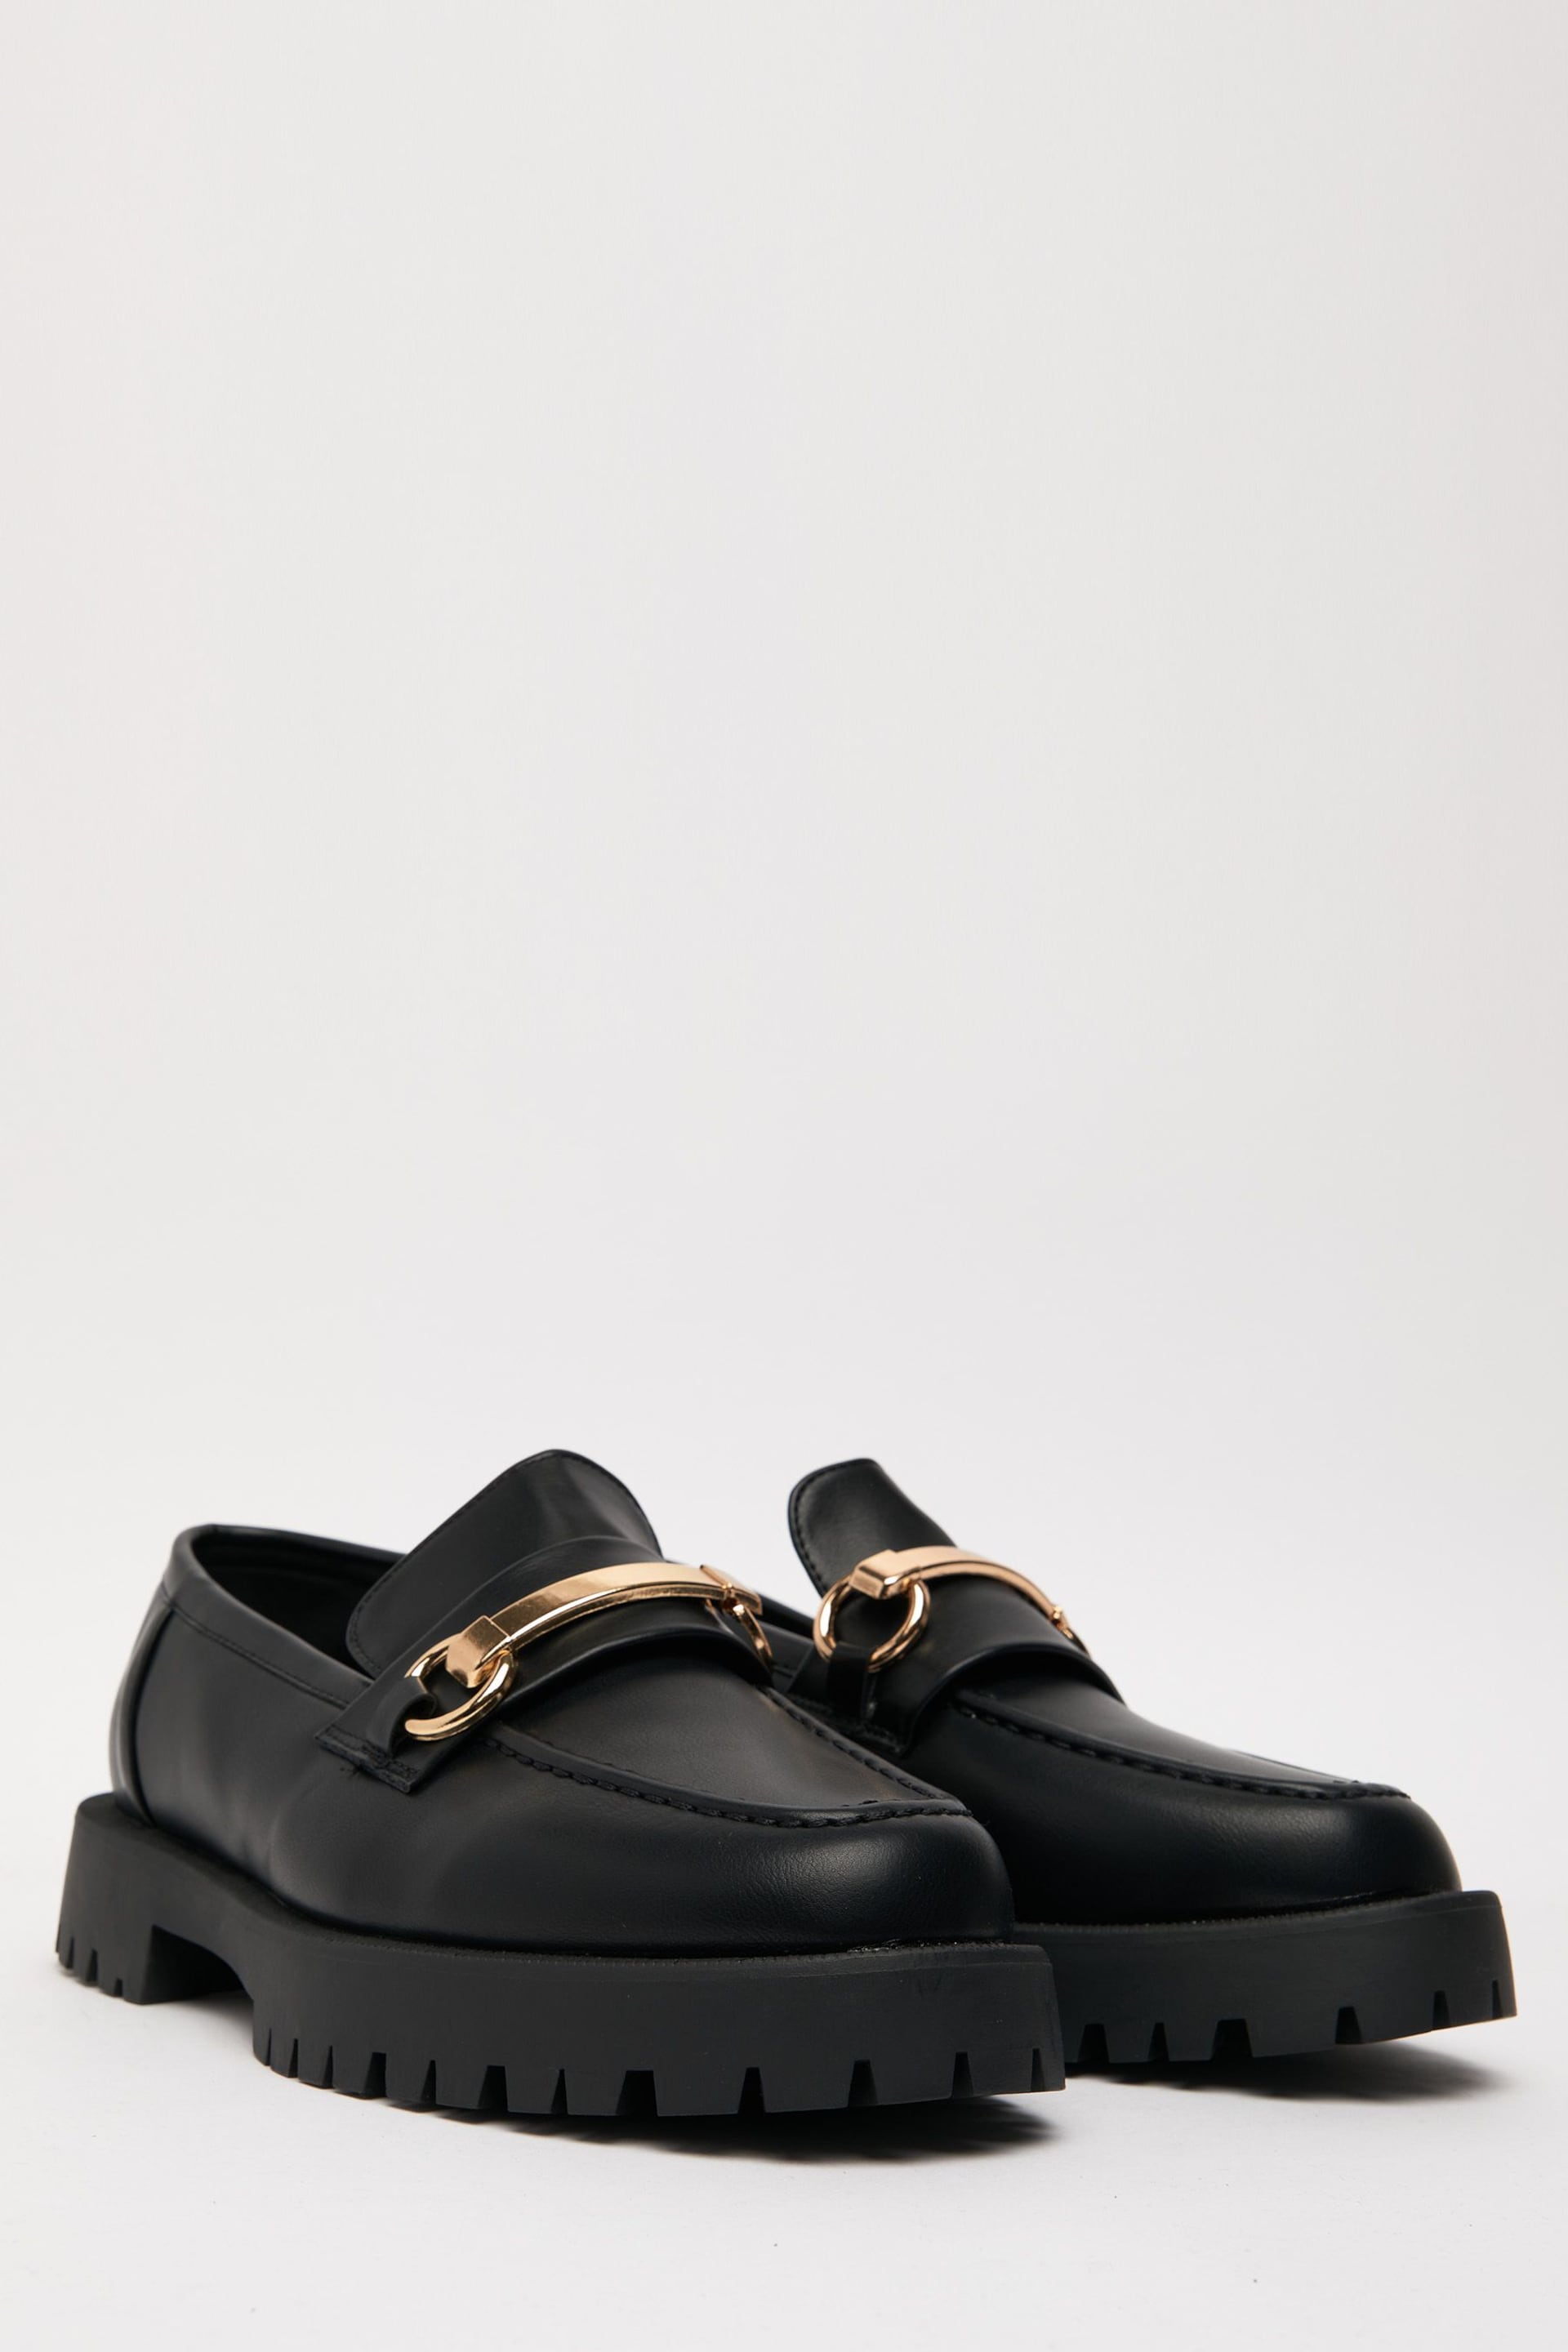 Schuh Junior Black Lagoon Mary Jane Shoes - Image 3 of 5